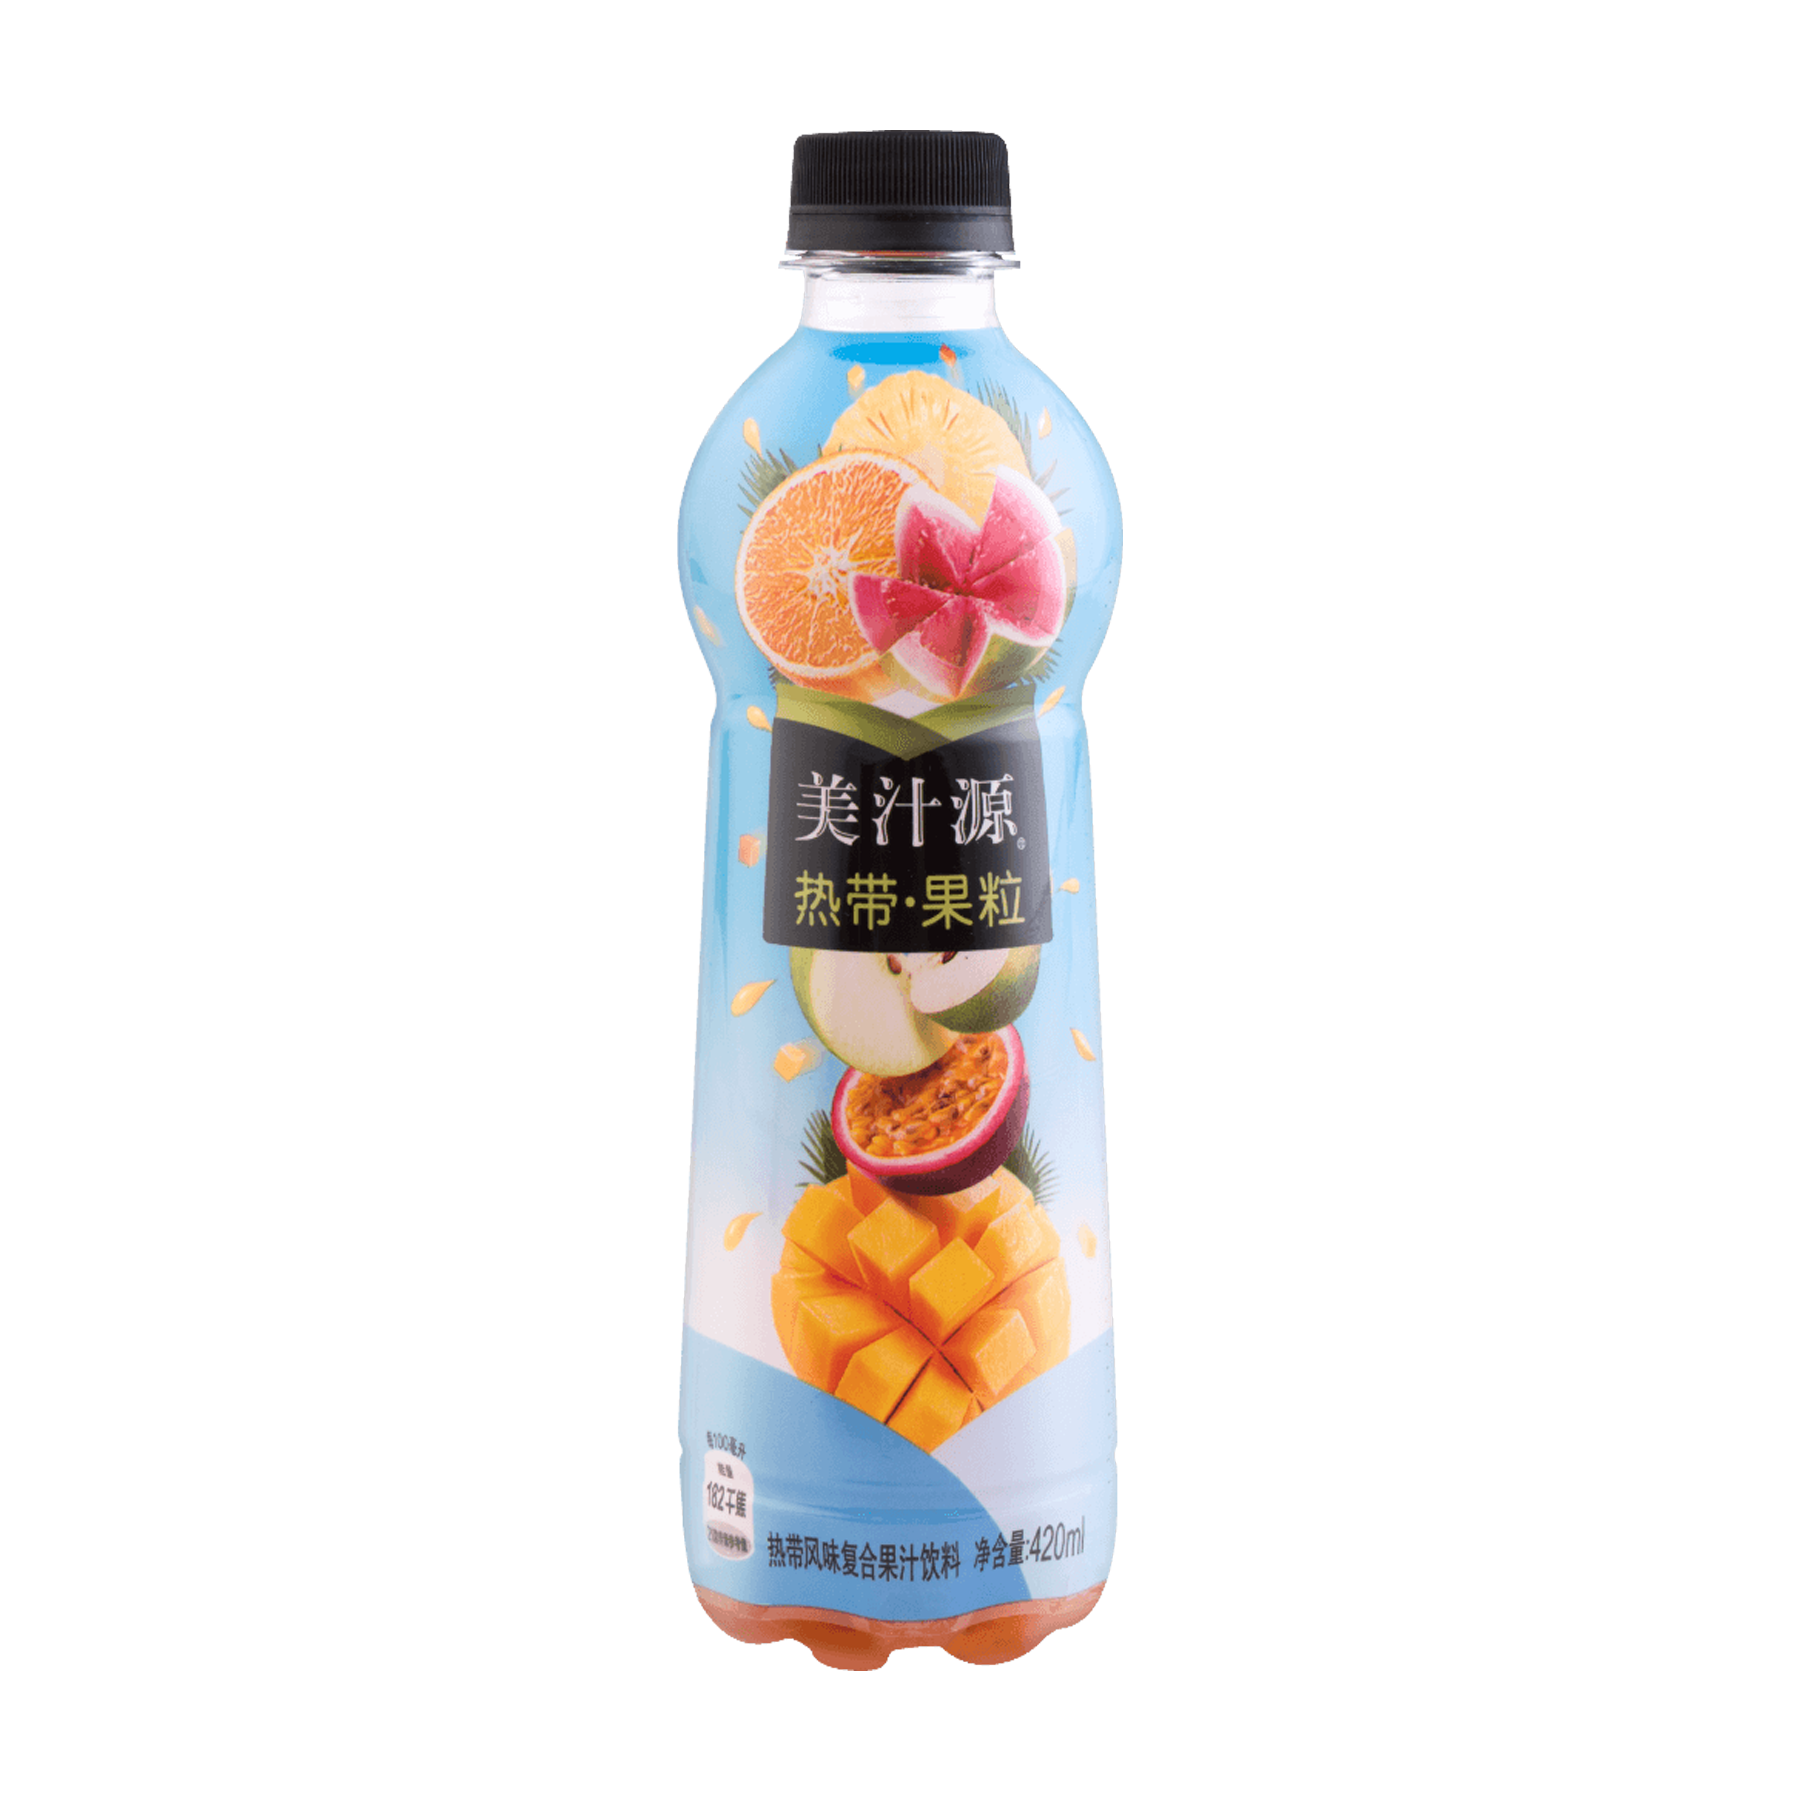 Minute Maid Tropical Fruit Flavored Juice (420Ml)